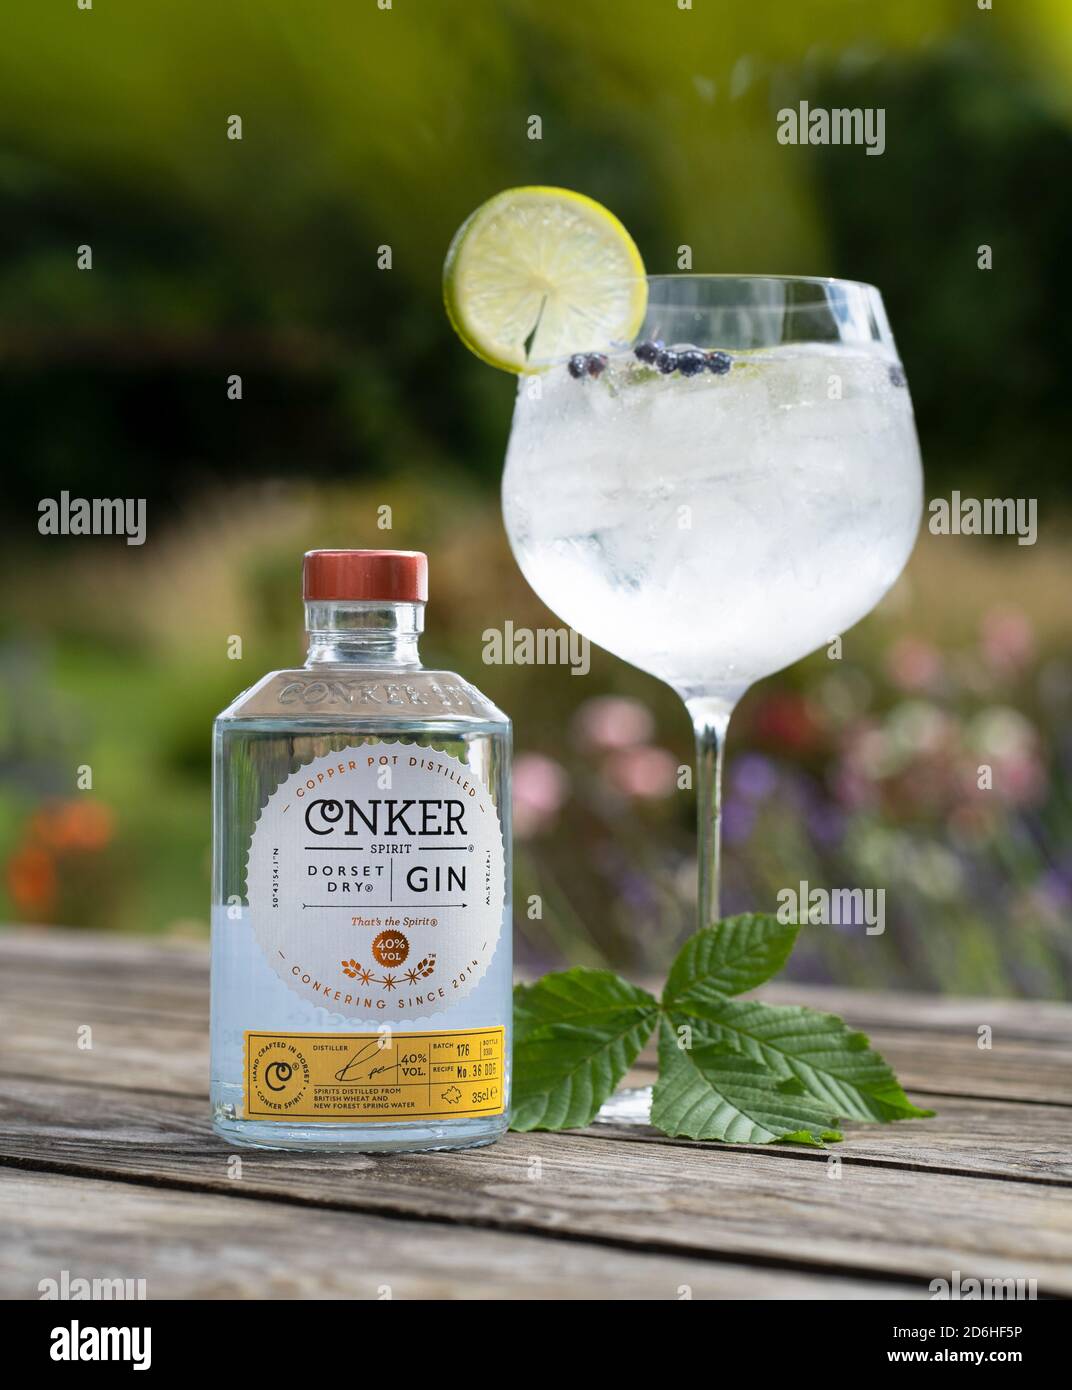 Large gin and tonic drinks glass containing ice and lemon with Conker Dorset Dry Gin bottle with lavender bushes in the summer sunlight on table Stock Photo